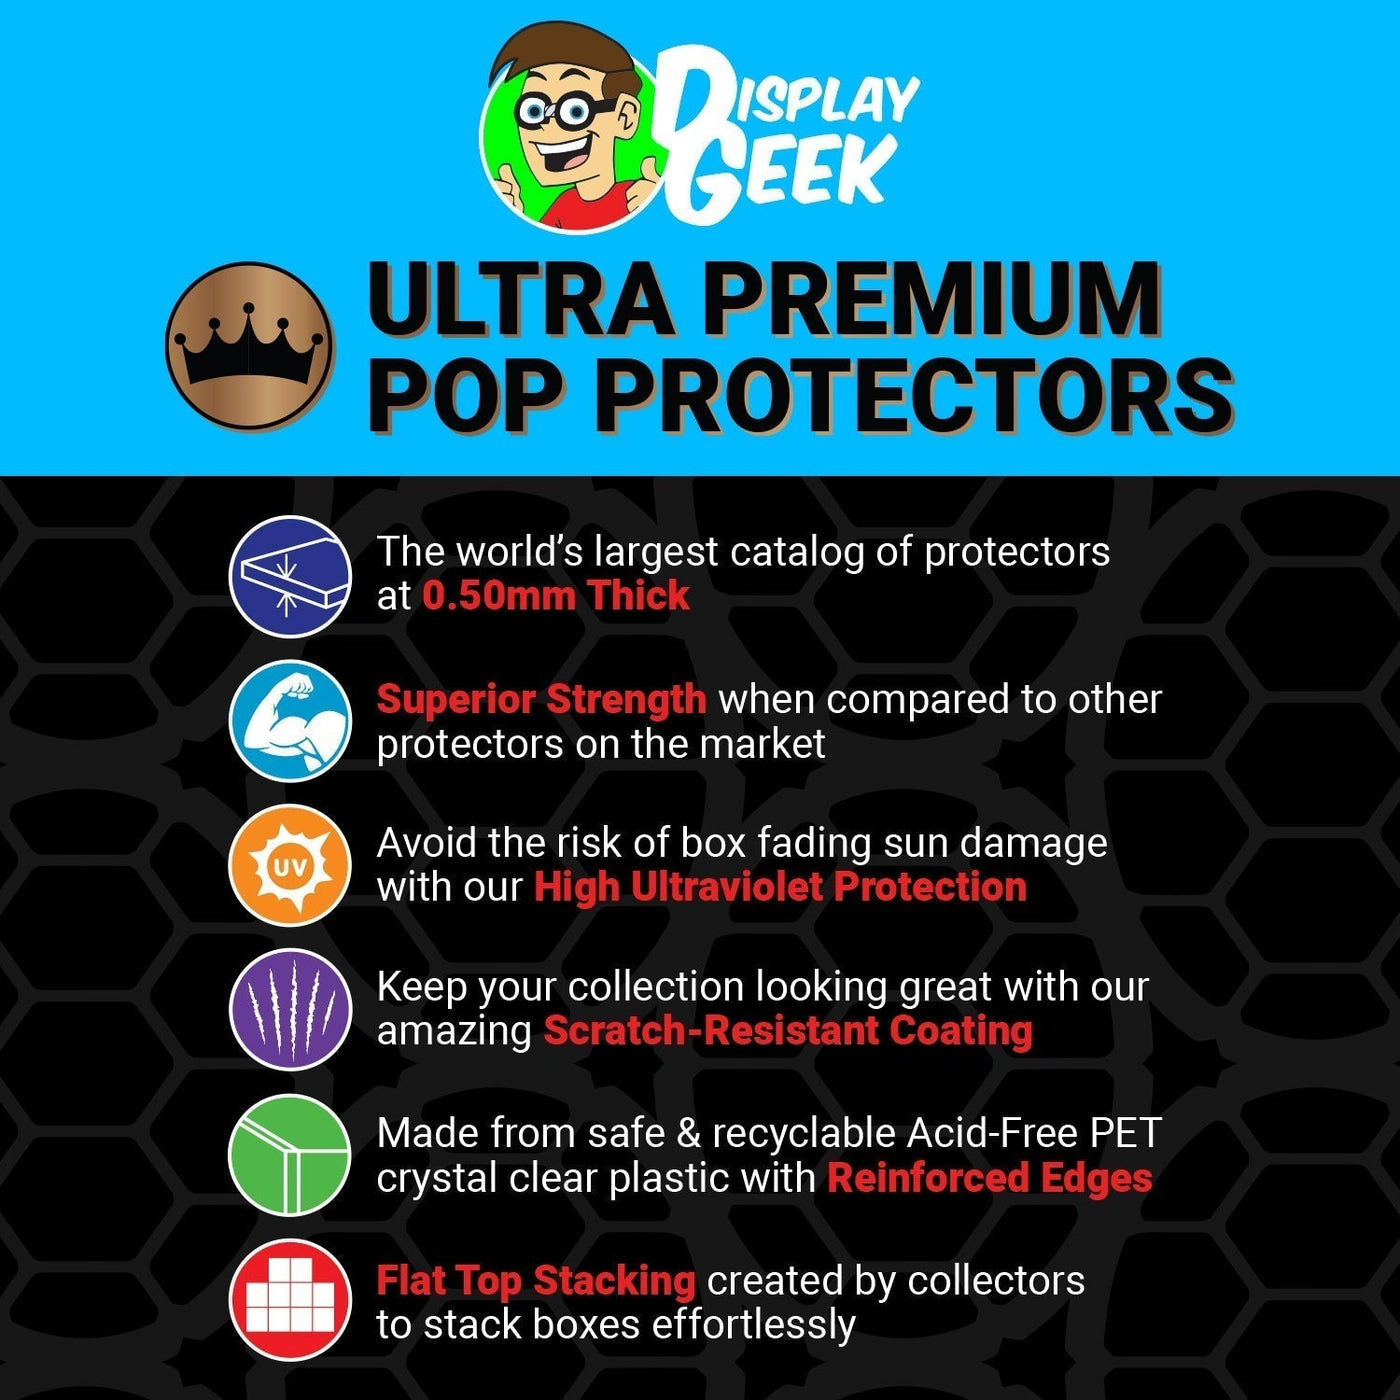 Pop Protector for 6 inch Stay Puft Marshmallow Angry Toasted #109 Super Funko on The Protector Guide App by Display Geek